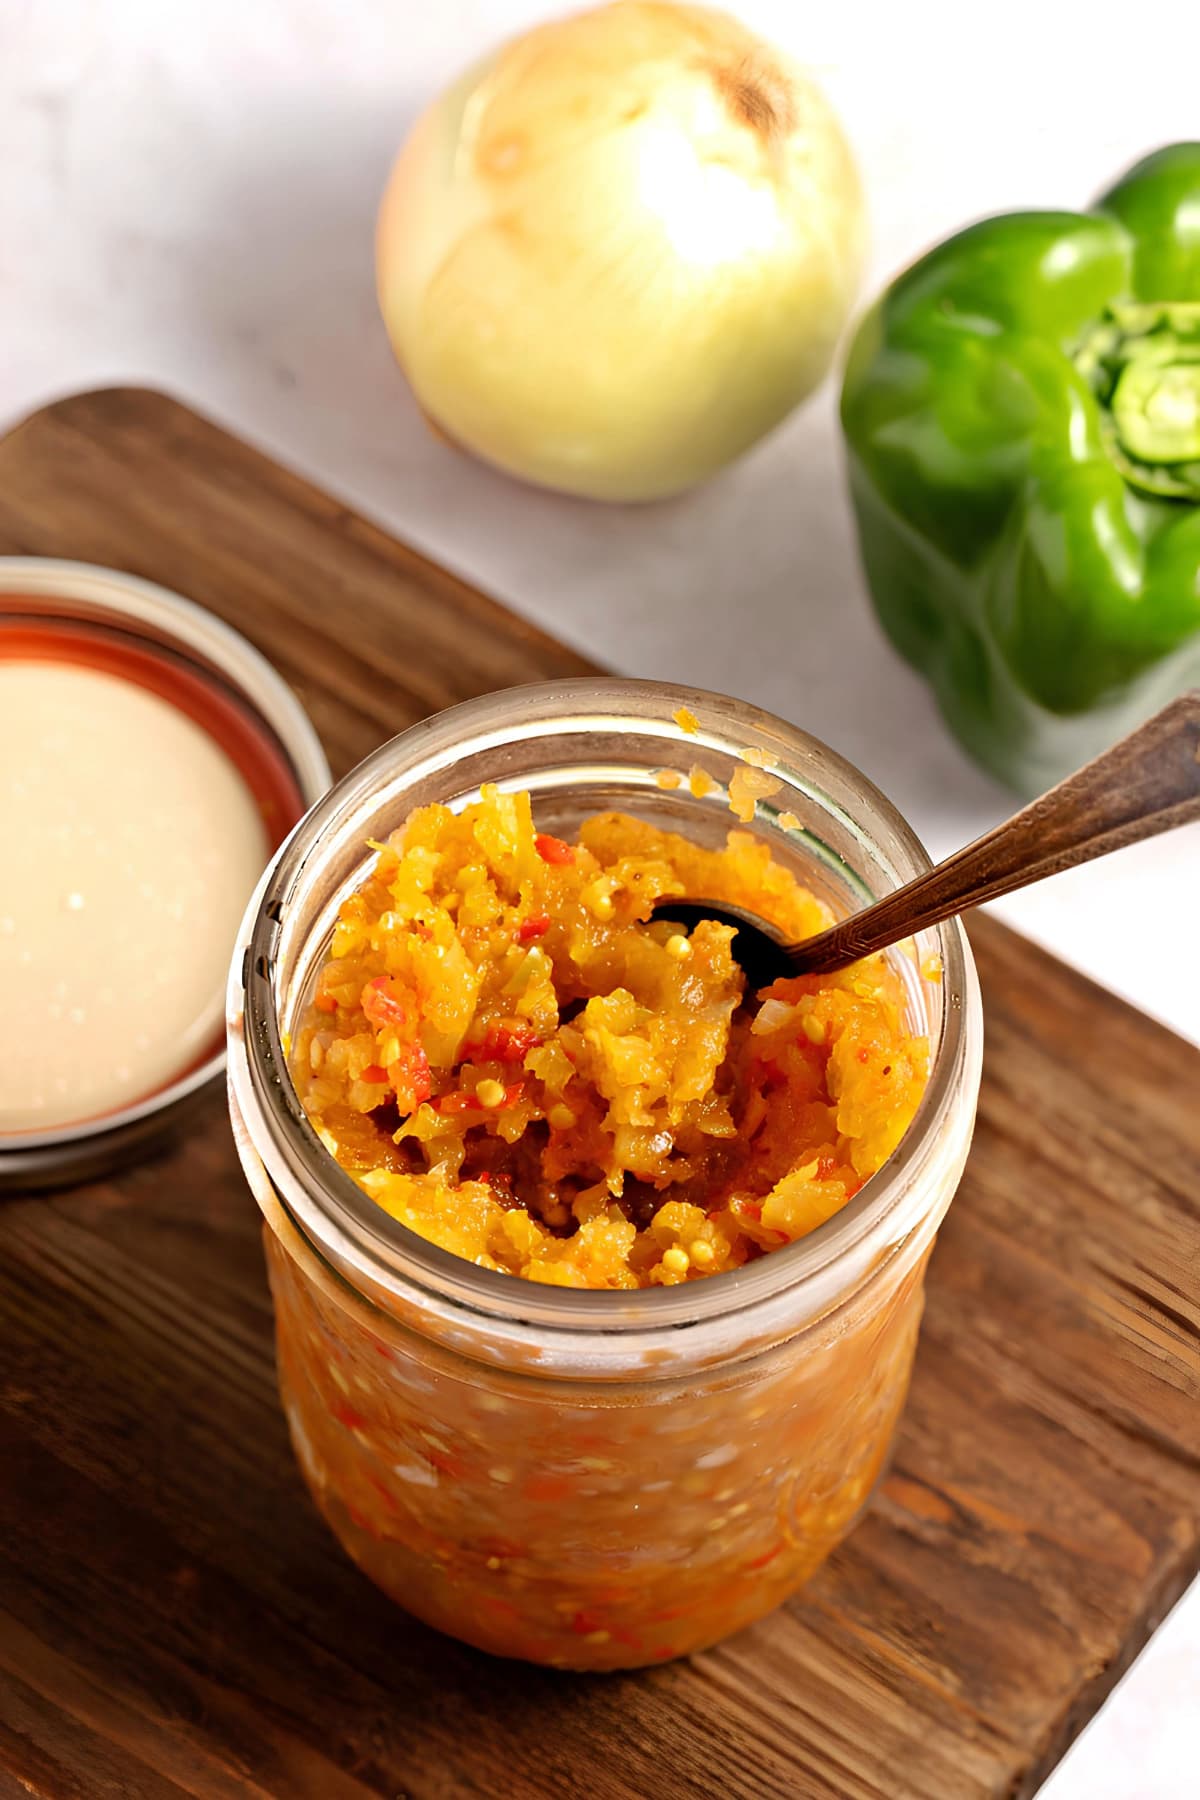 The Best Green Tomato Relish (Easy Recipe) featuring Sweet and Tangy Green Tomato Relish in a Mason Jar with a Spoon and Pepper and Onion in the Background